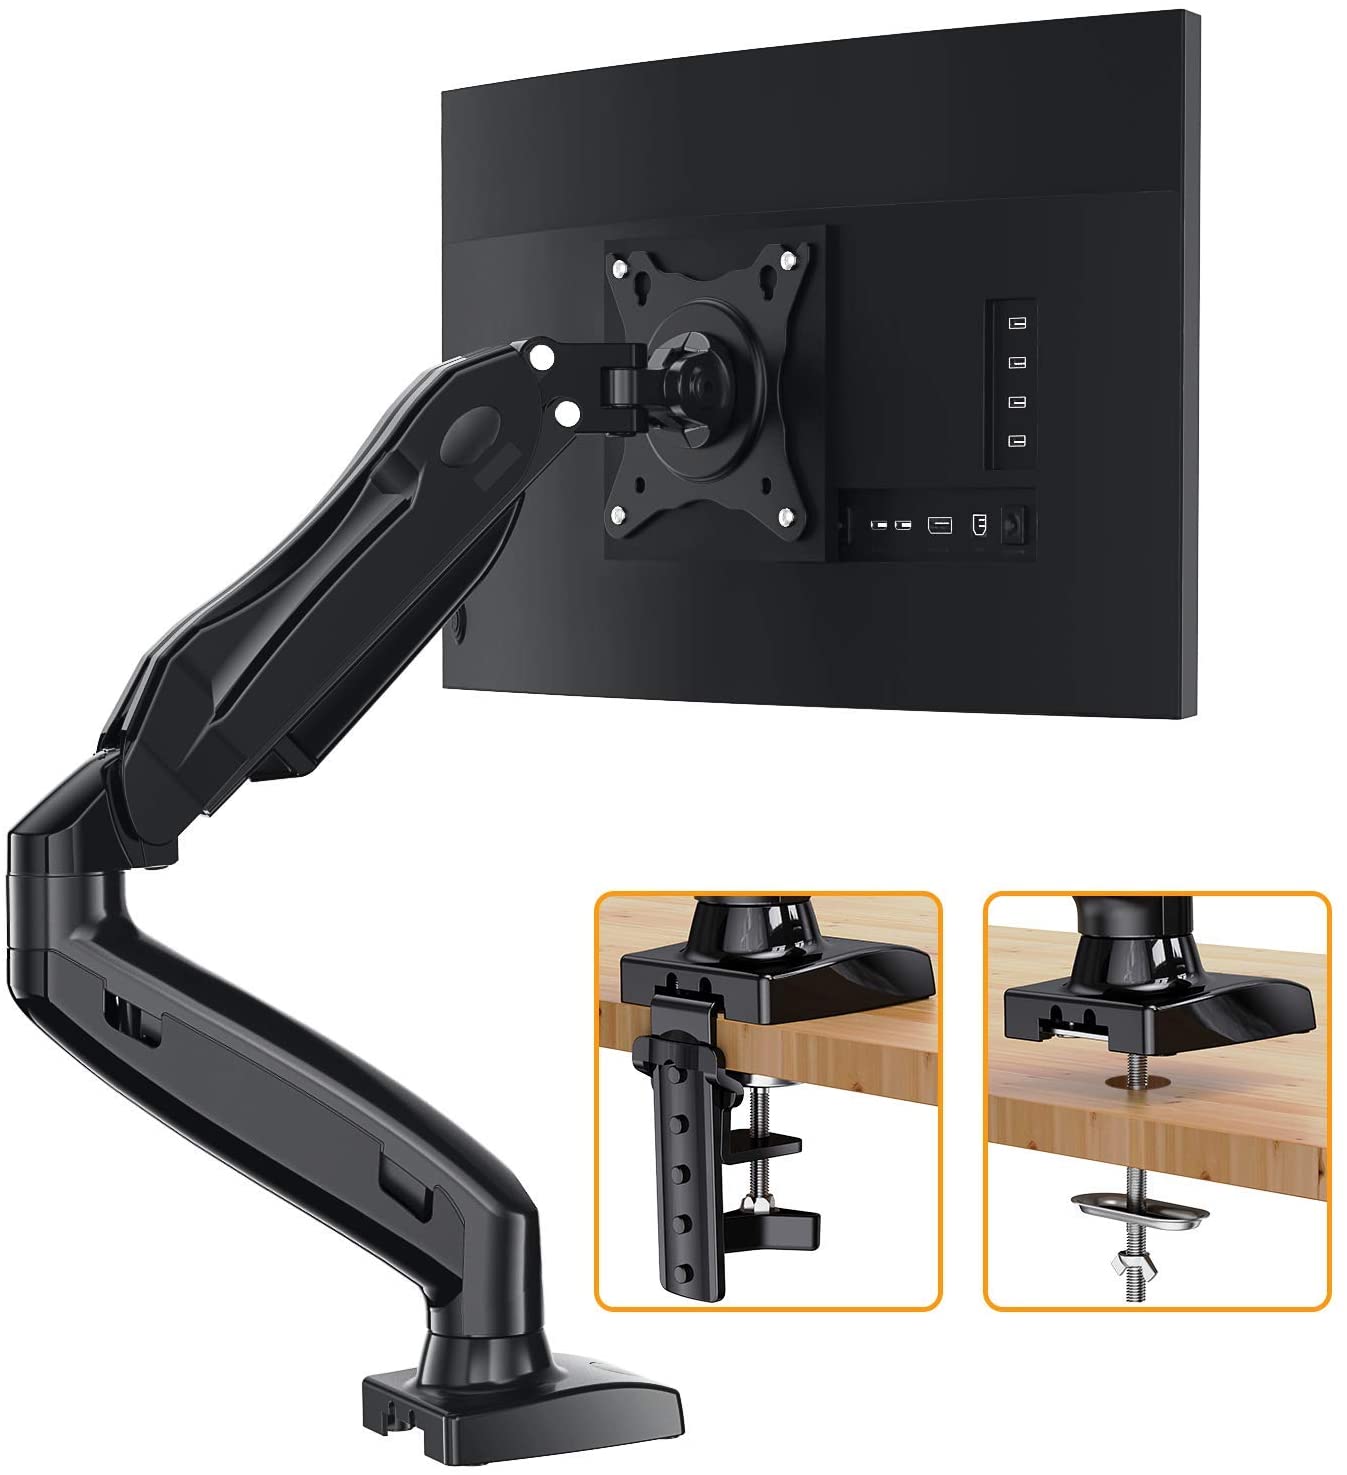 PERLESMITH Single Monitor Mount Stand for Most 17-27 inch Flat Curved Monitors only $19.99 + Free Shipping